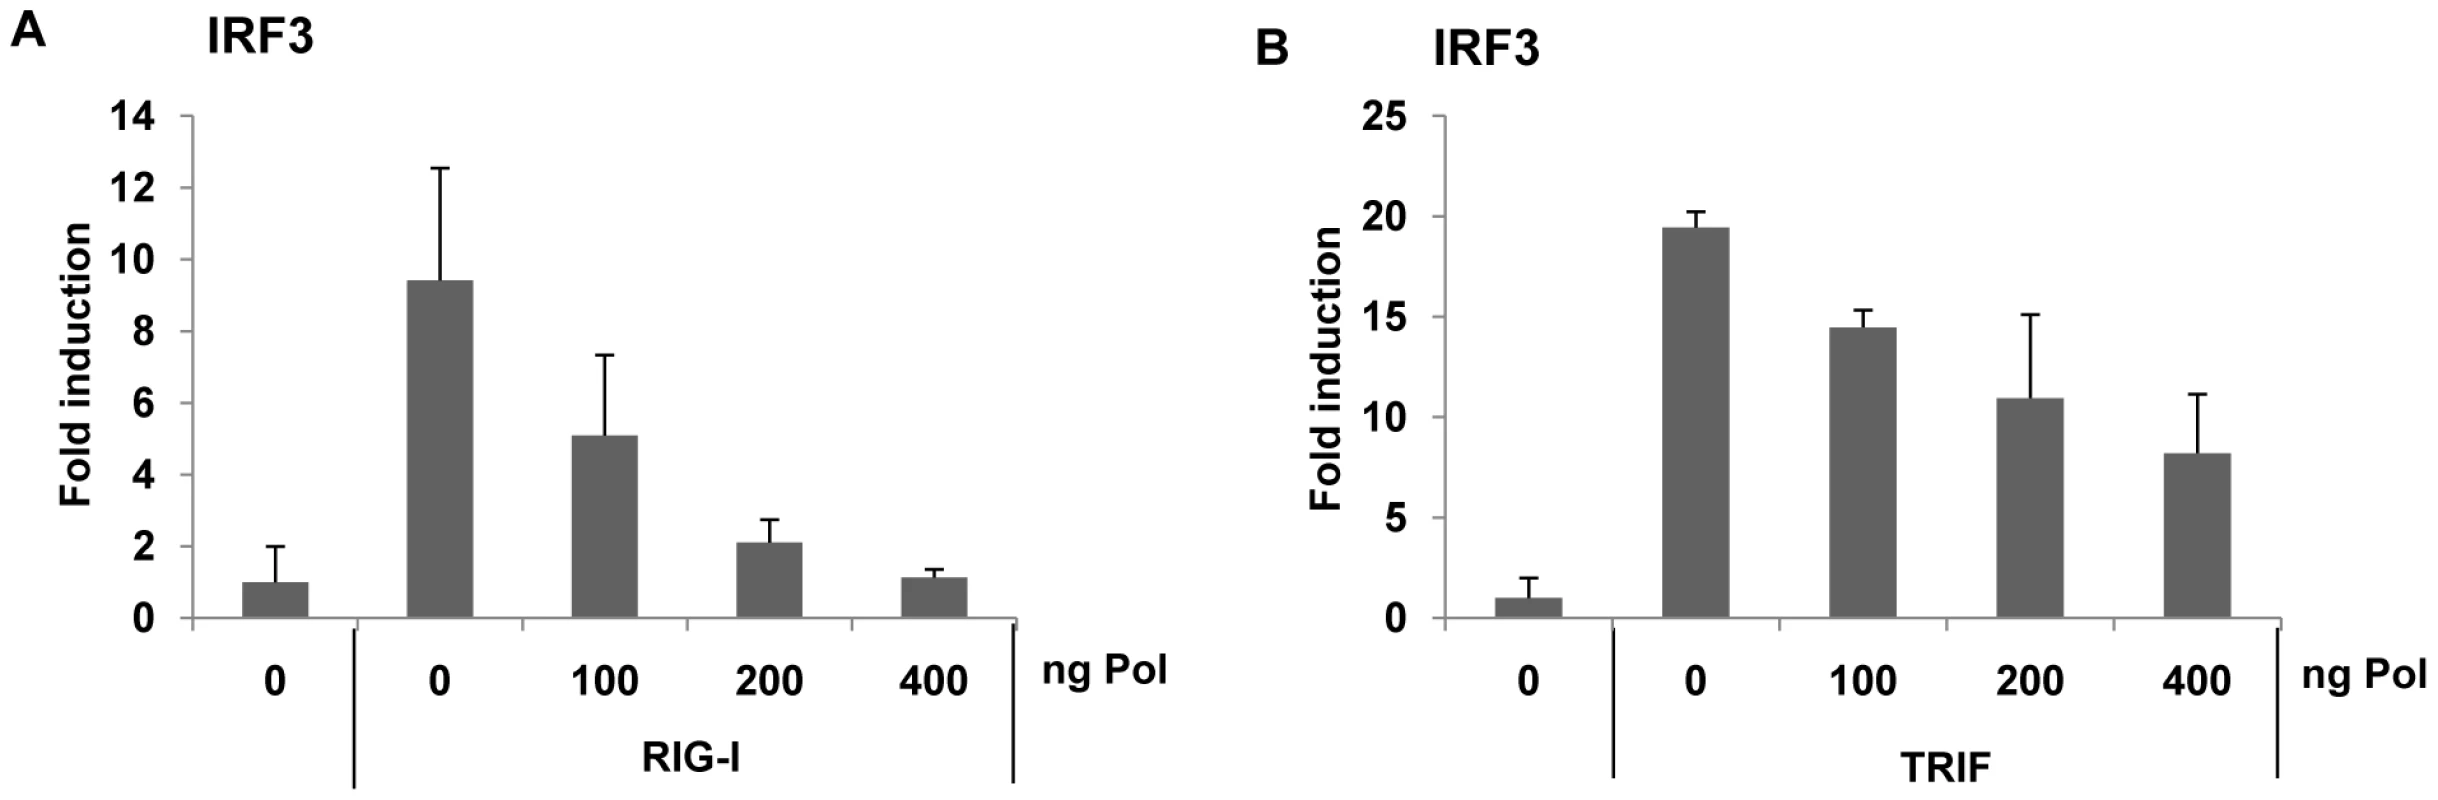 HBV Pol inhibits both RIG-I- and TRIF-induced IRF3 activation.